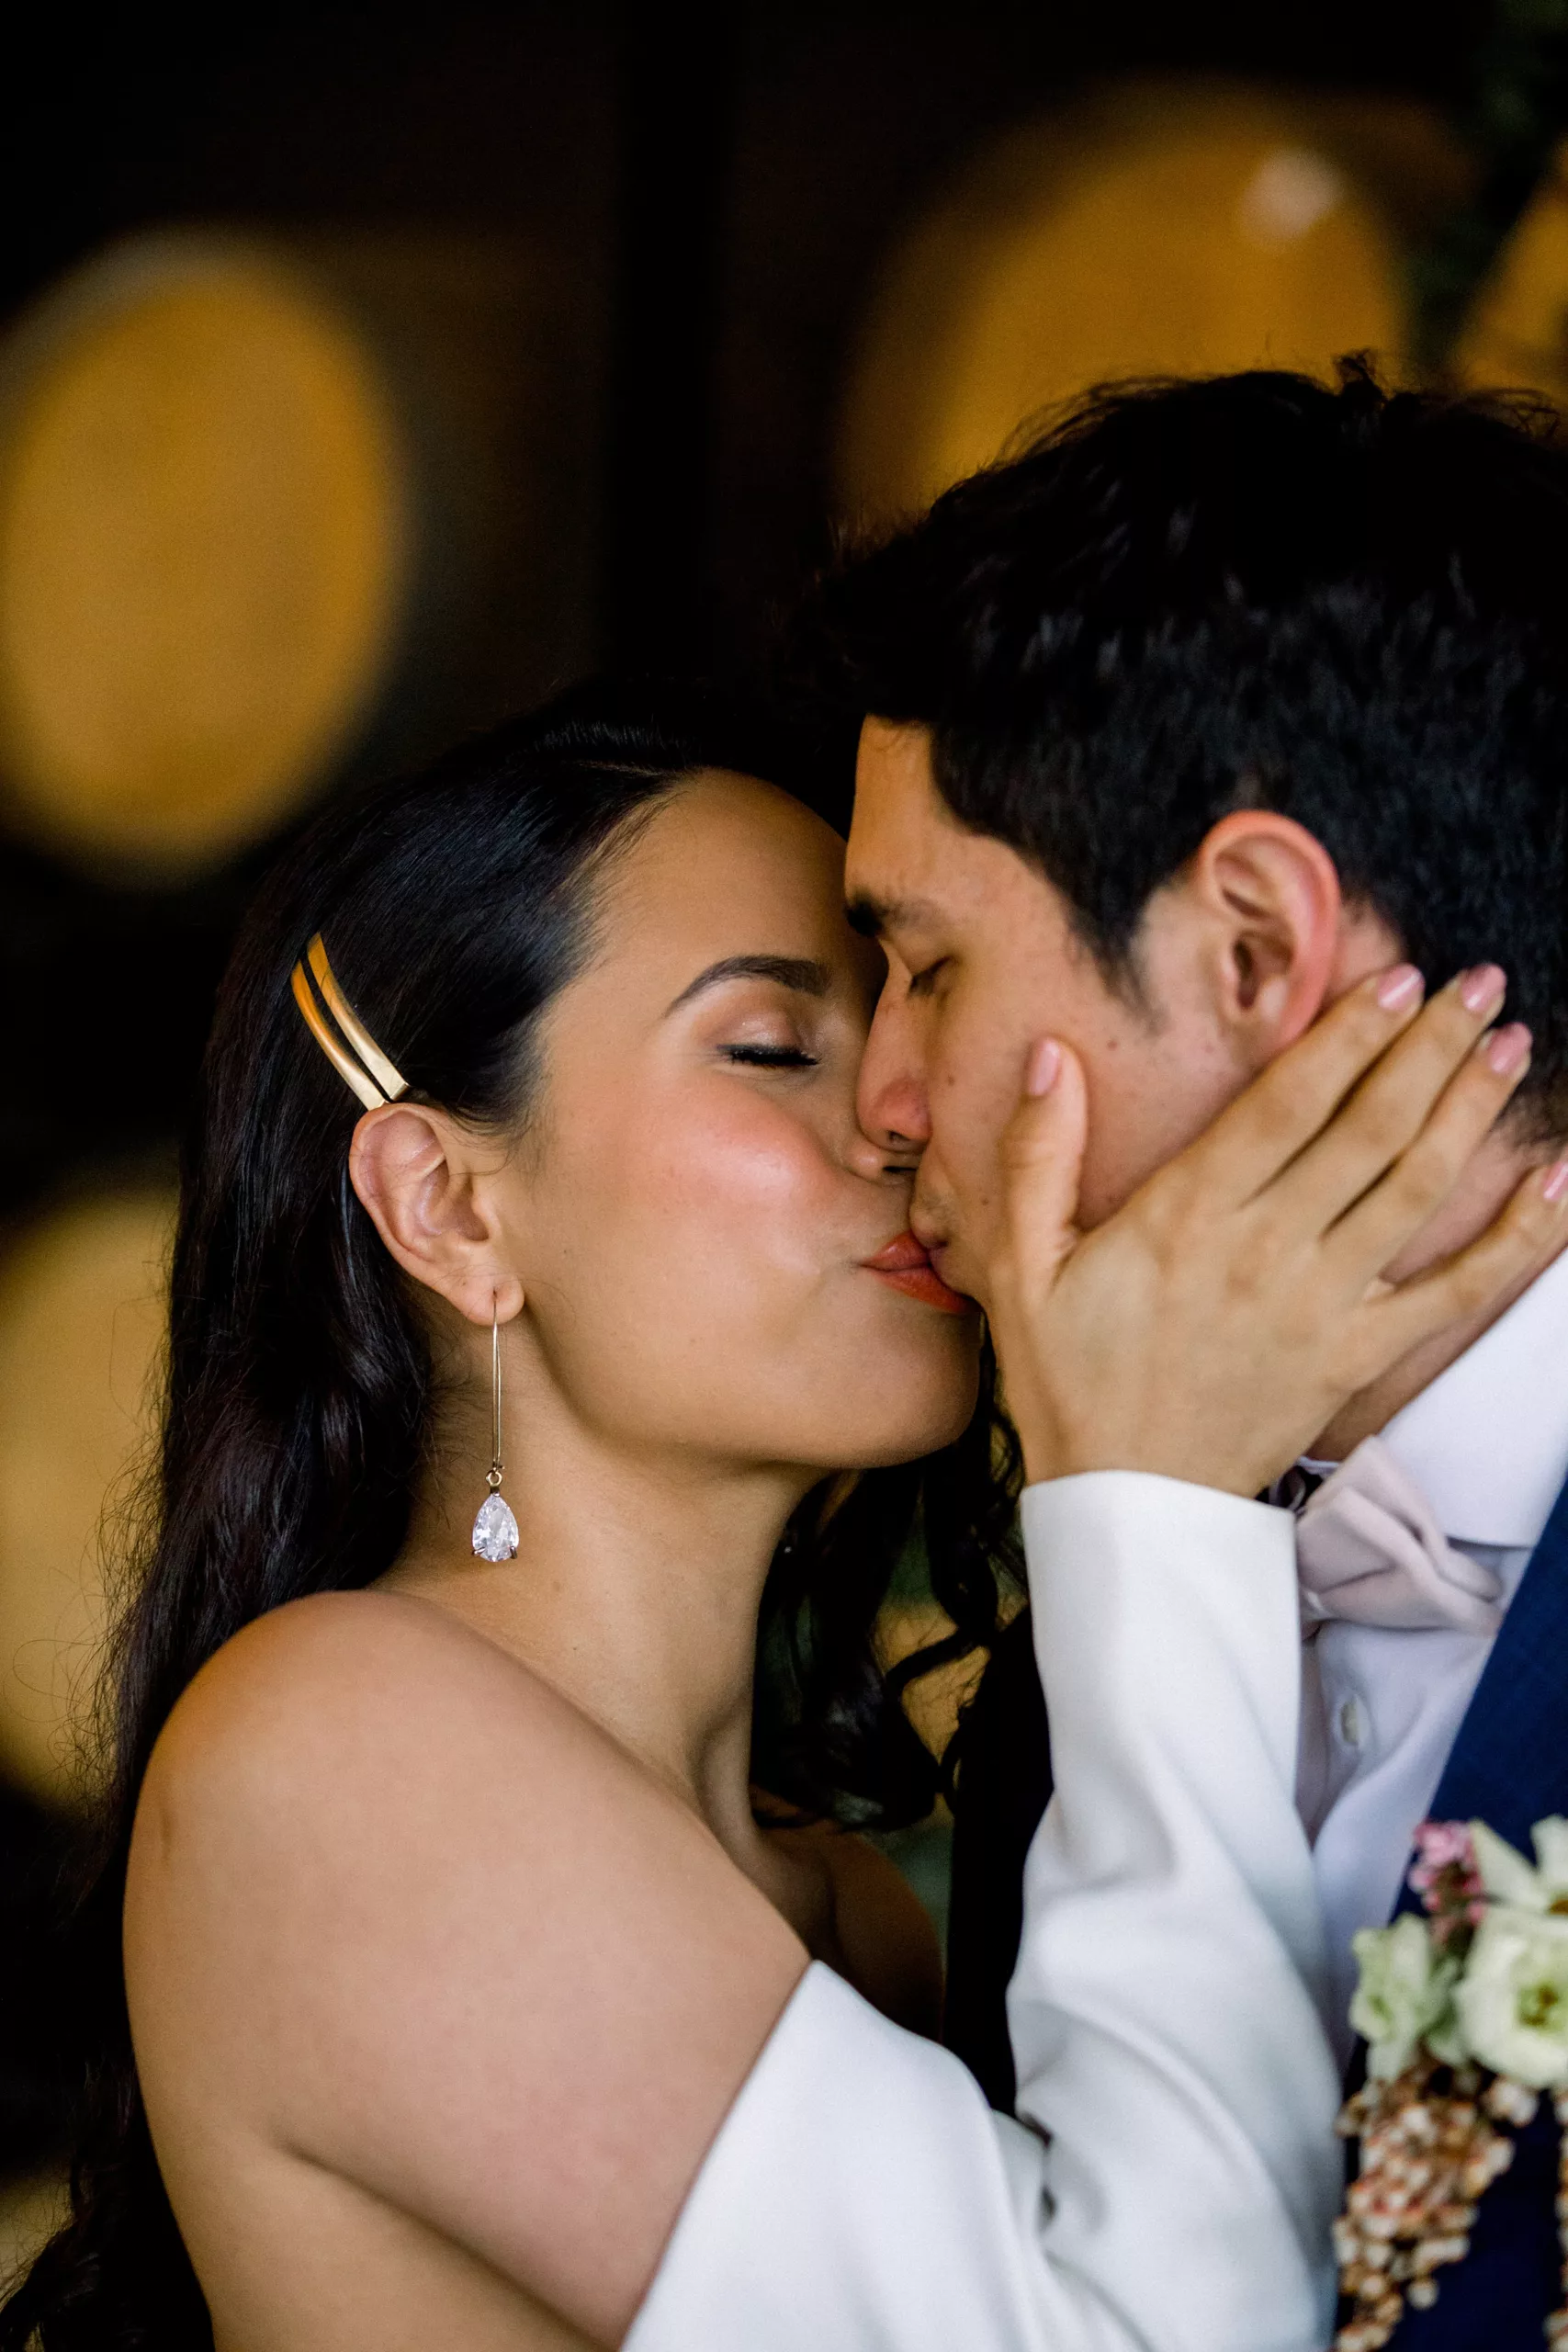 Newlyweds kiss in a room lined with wine barrels 